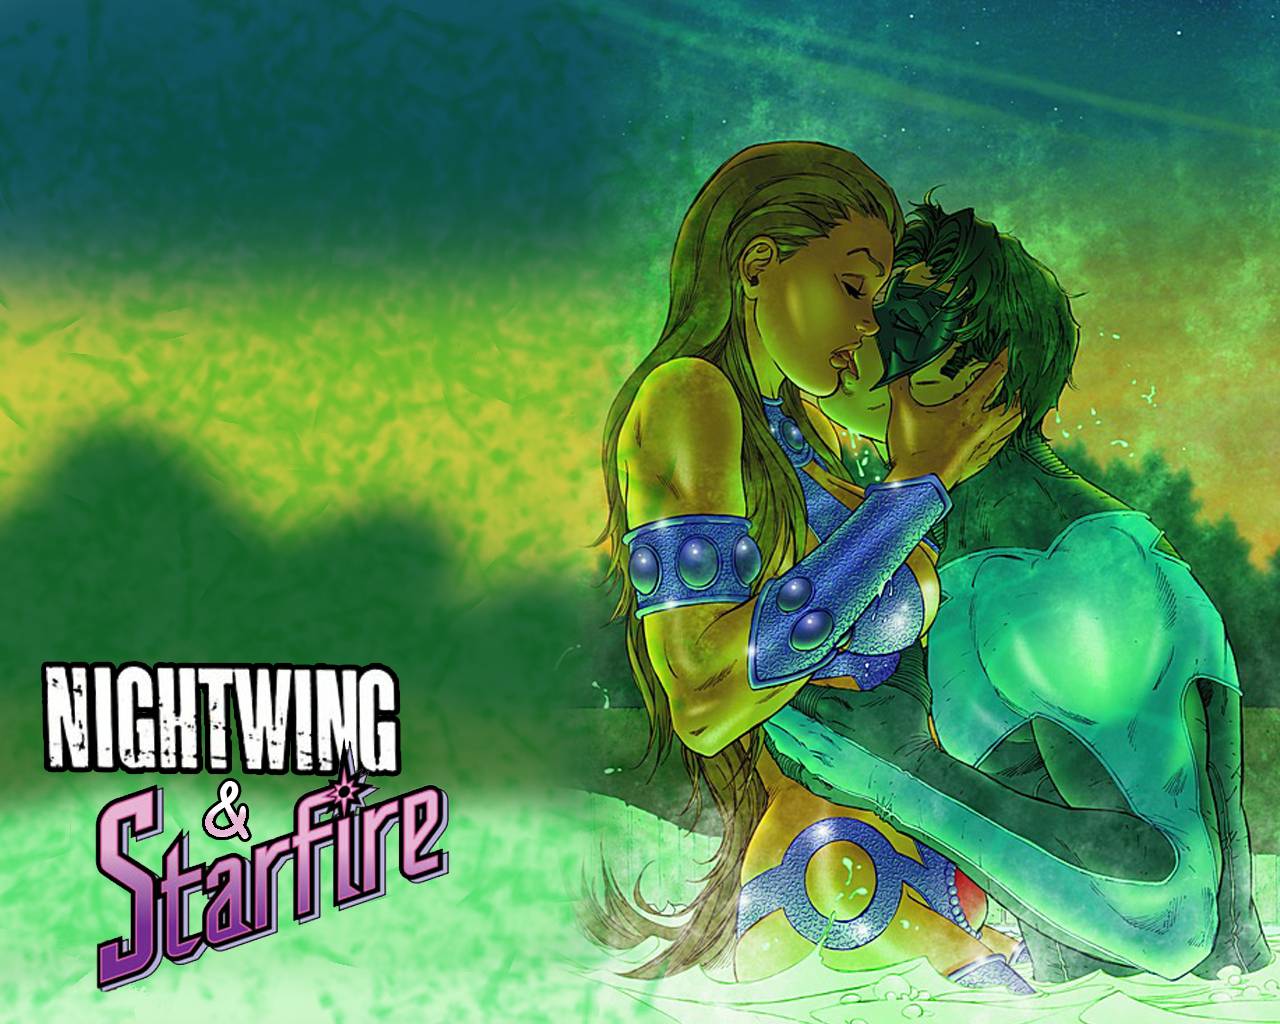 Nightwing Starfire Wallpapers by Drawgasm Designs